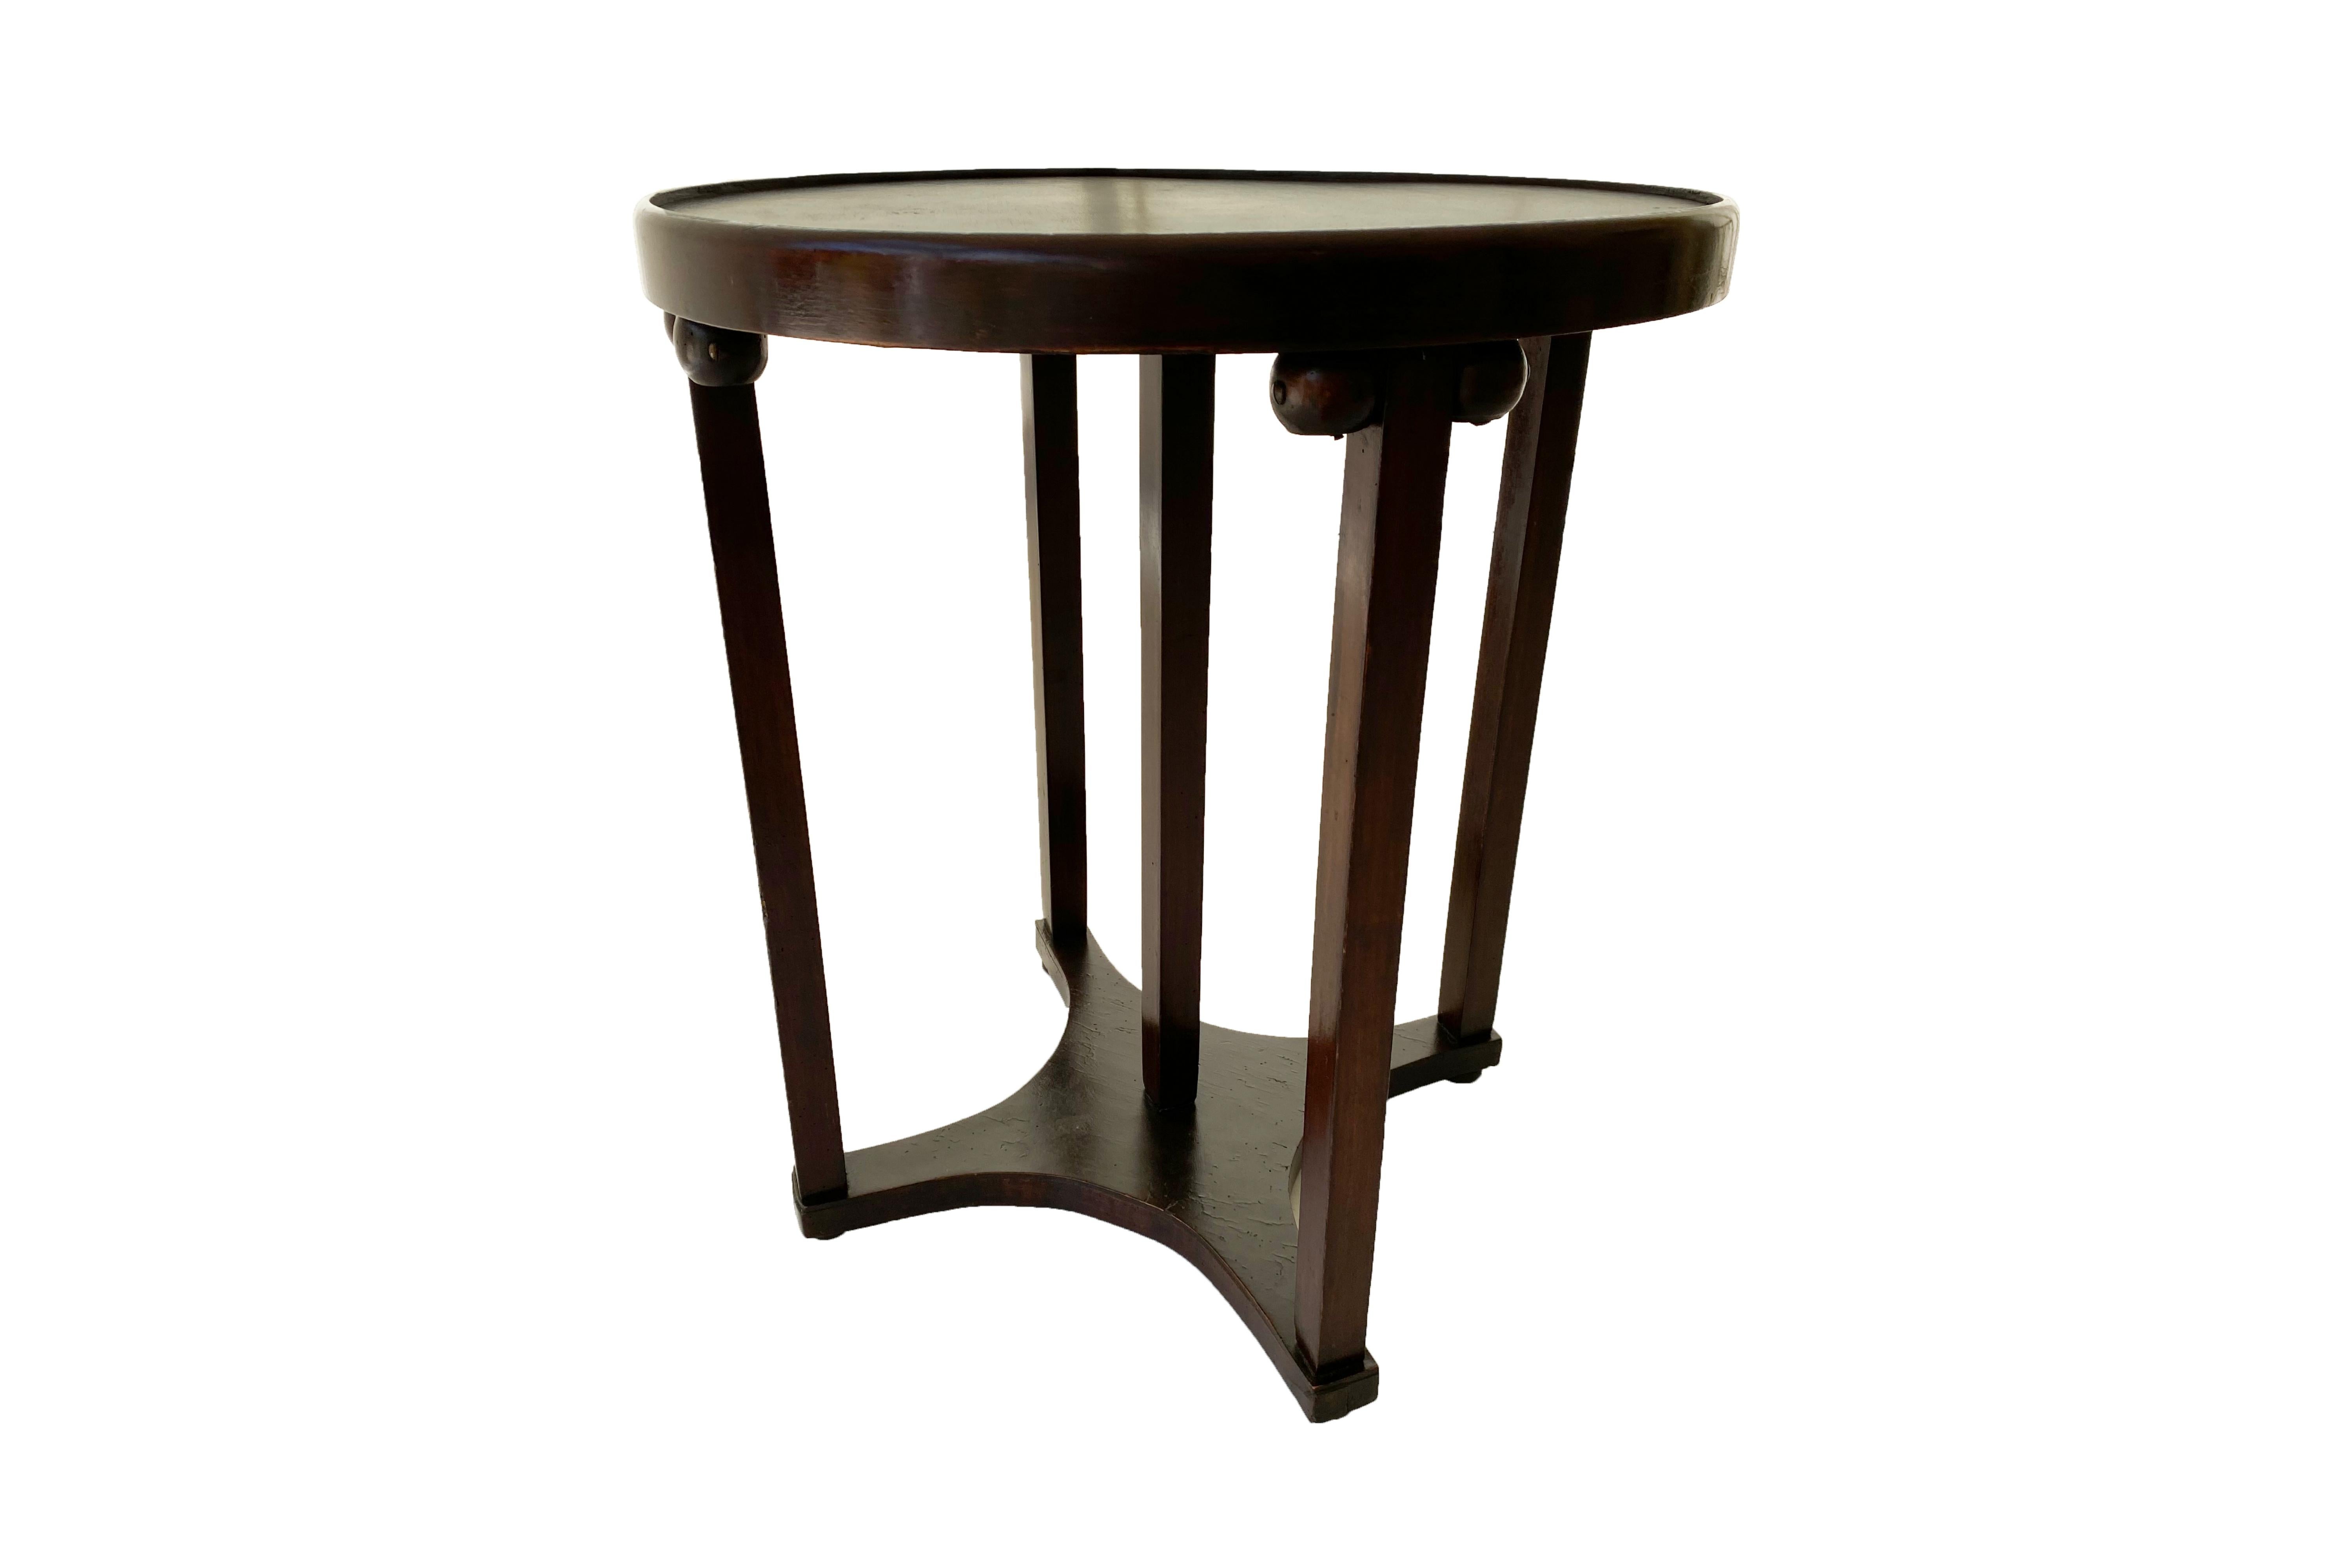 Josef Hoffmann Gueridon.
Made with bentwood.
Vienna Secession 
Circa 1910, Austria.
Vintage condition.
The Austrian architect Josef Hoffmann was a central figure in the evolution of modern design, and a leader in an aesthetic movement born in